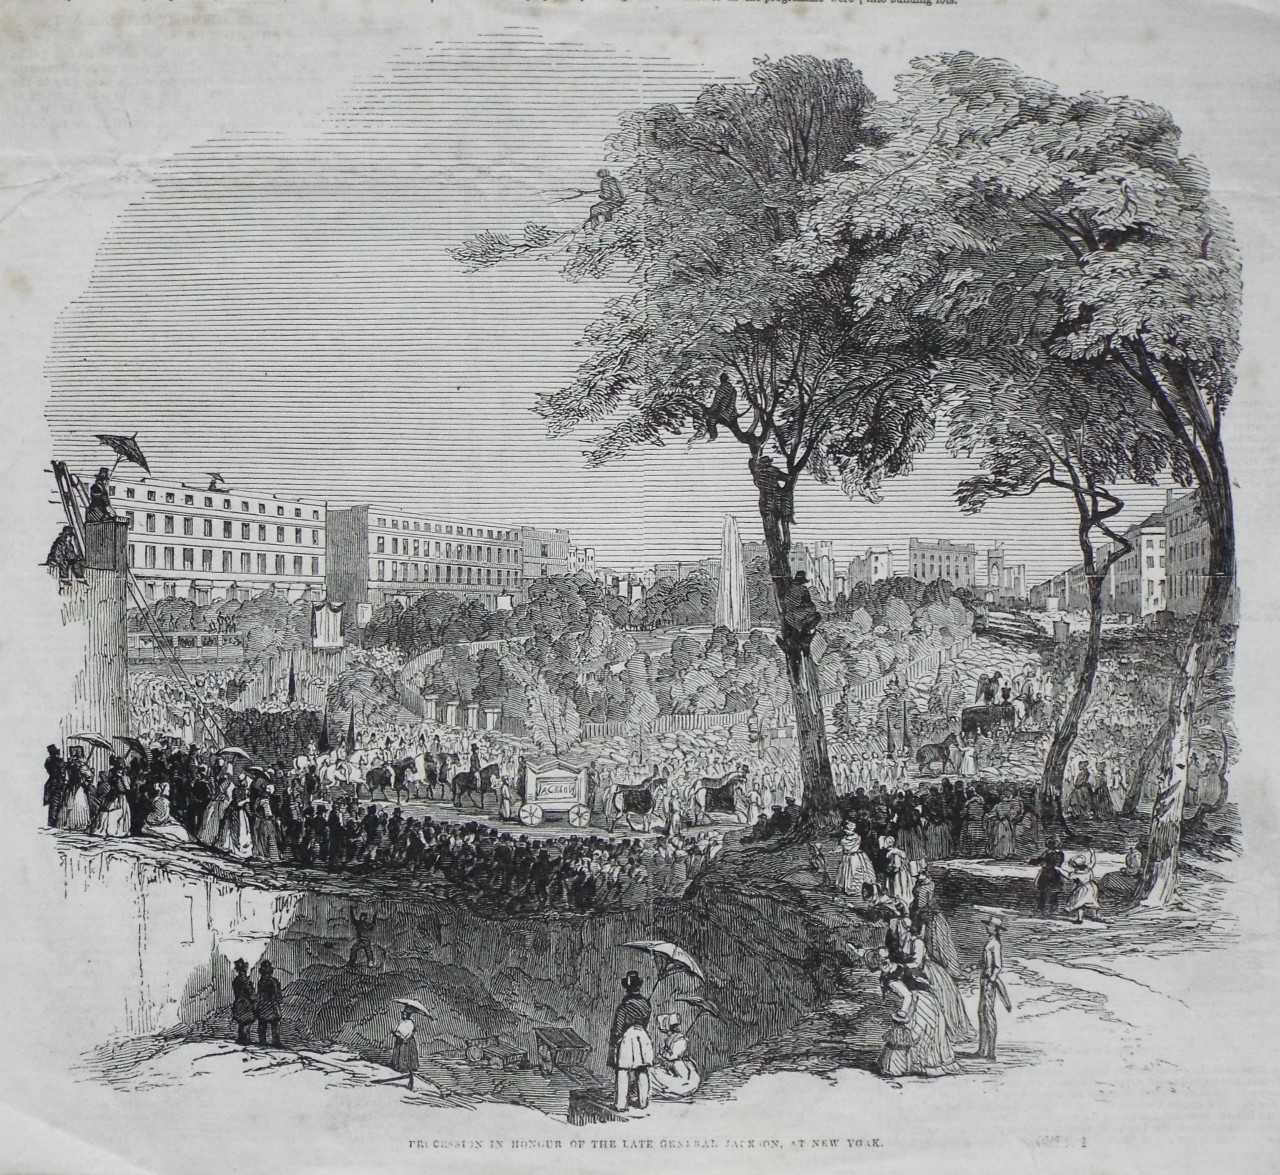 Wood - Procession in Honour of the Late General Jackson, at New York.